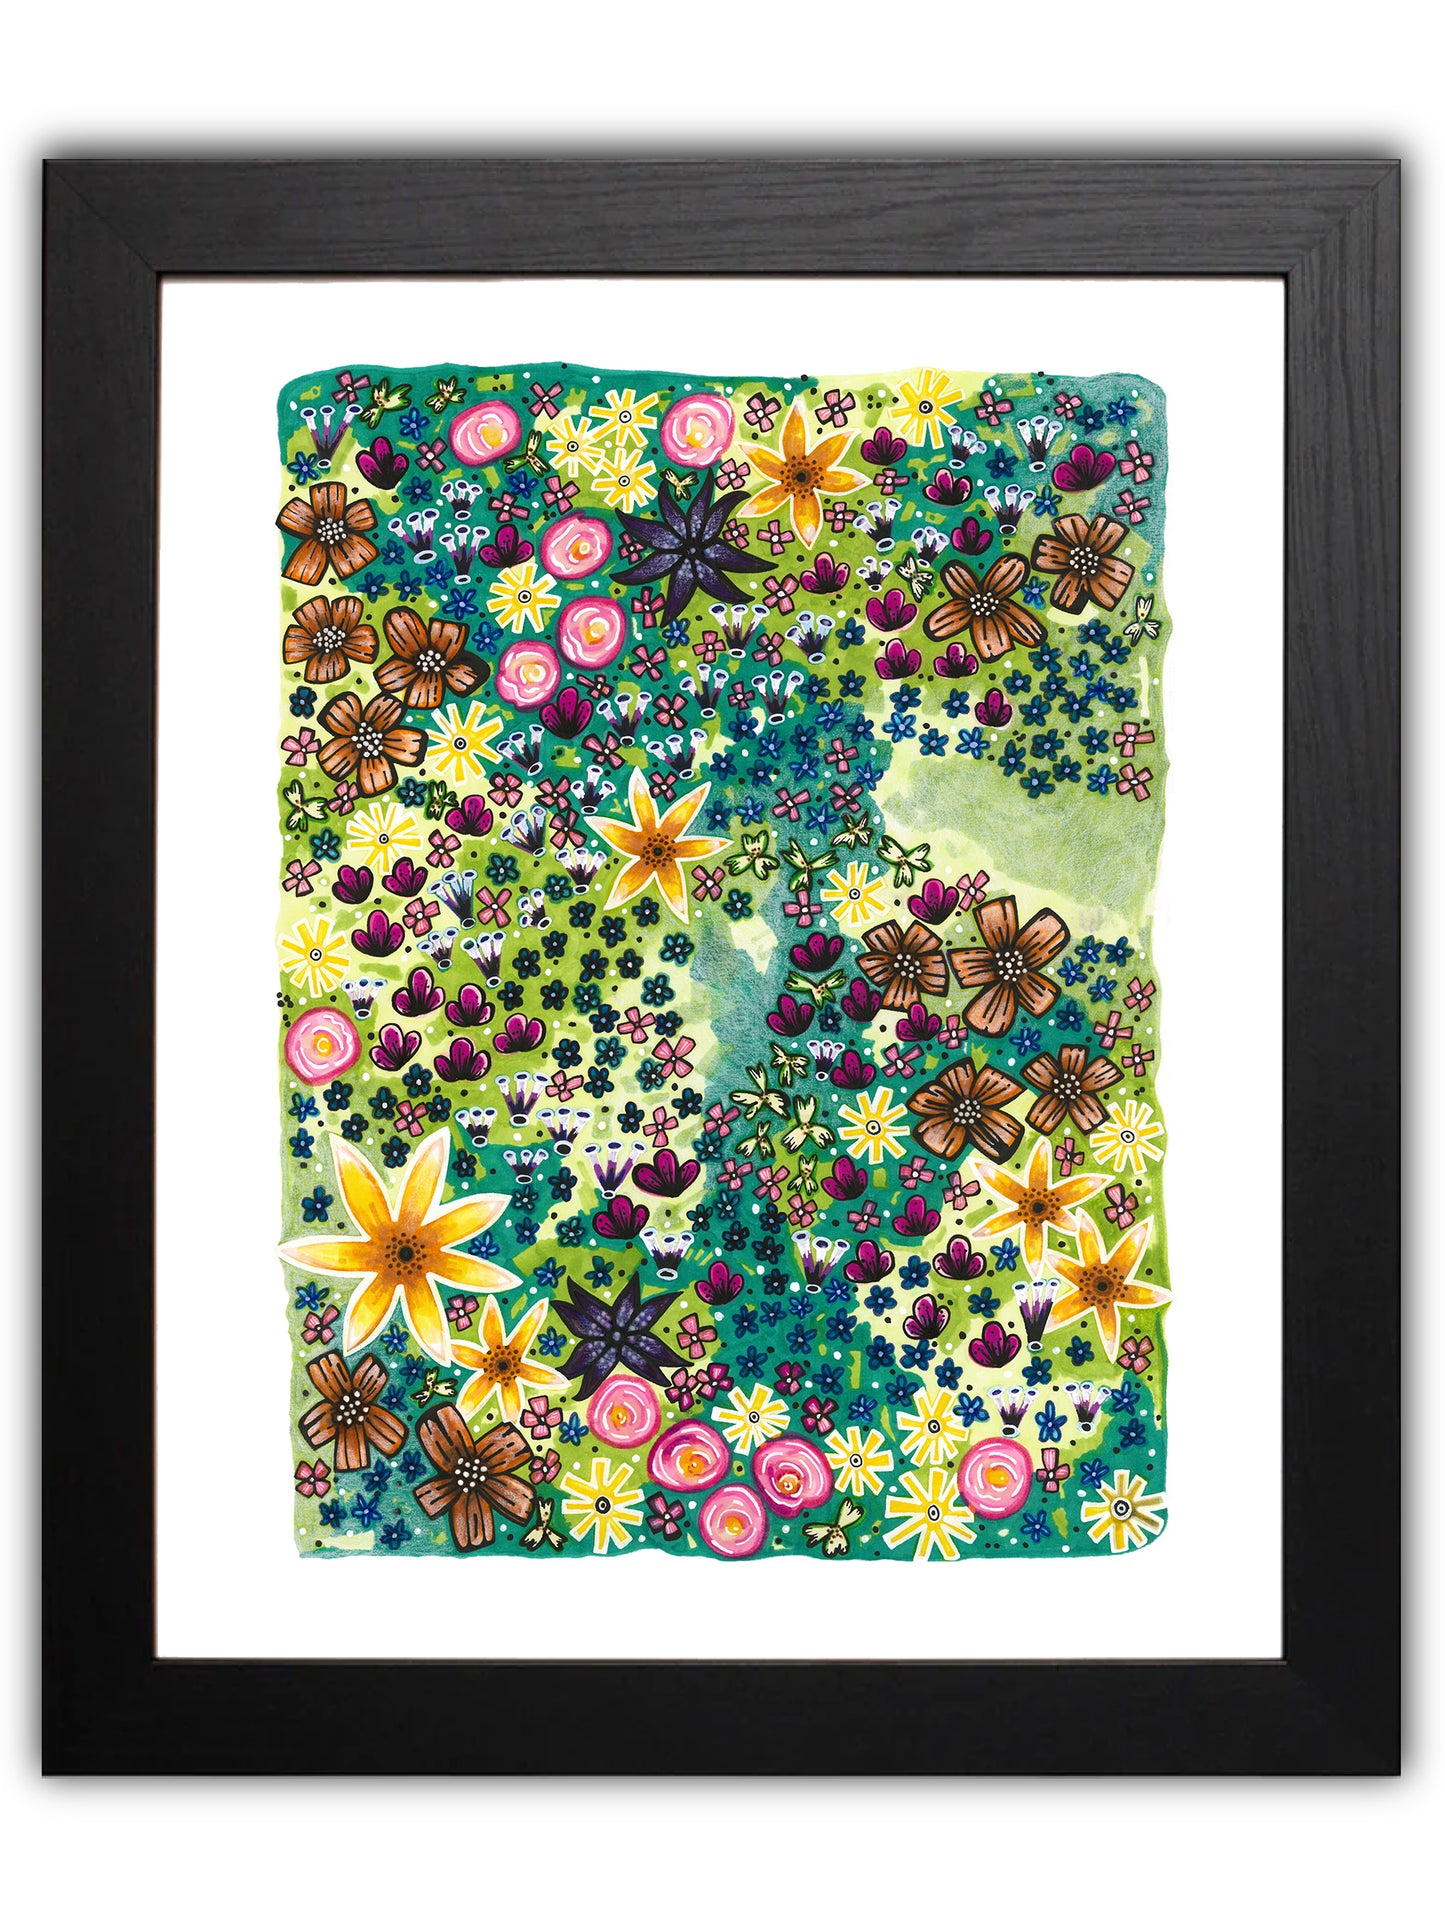 Illustration of a field of flowers, abstract